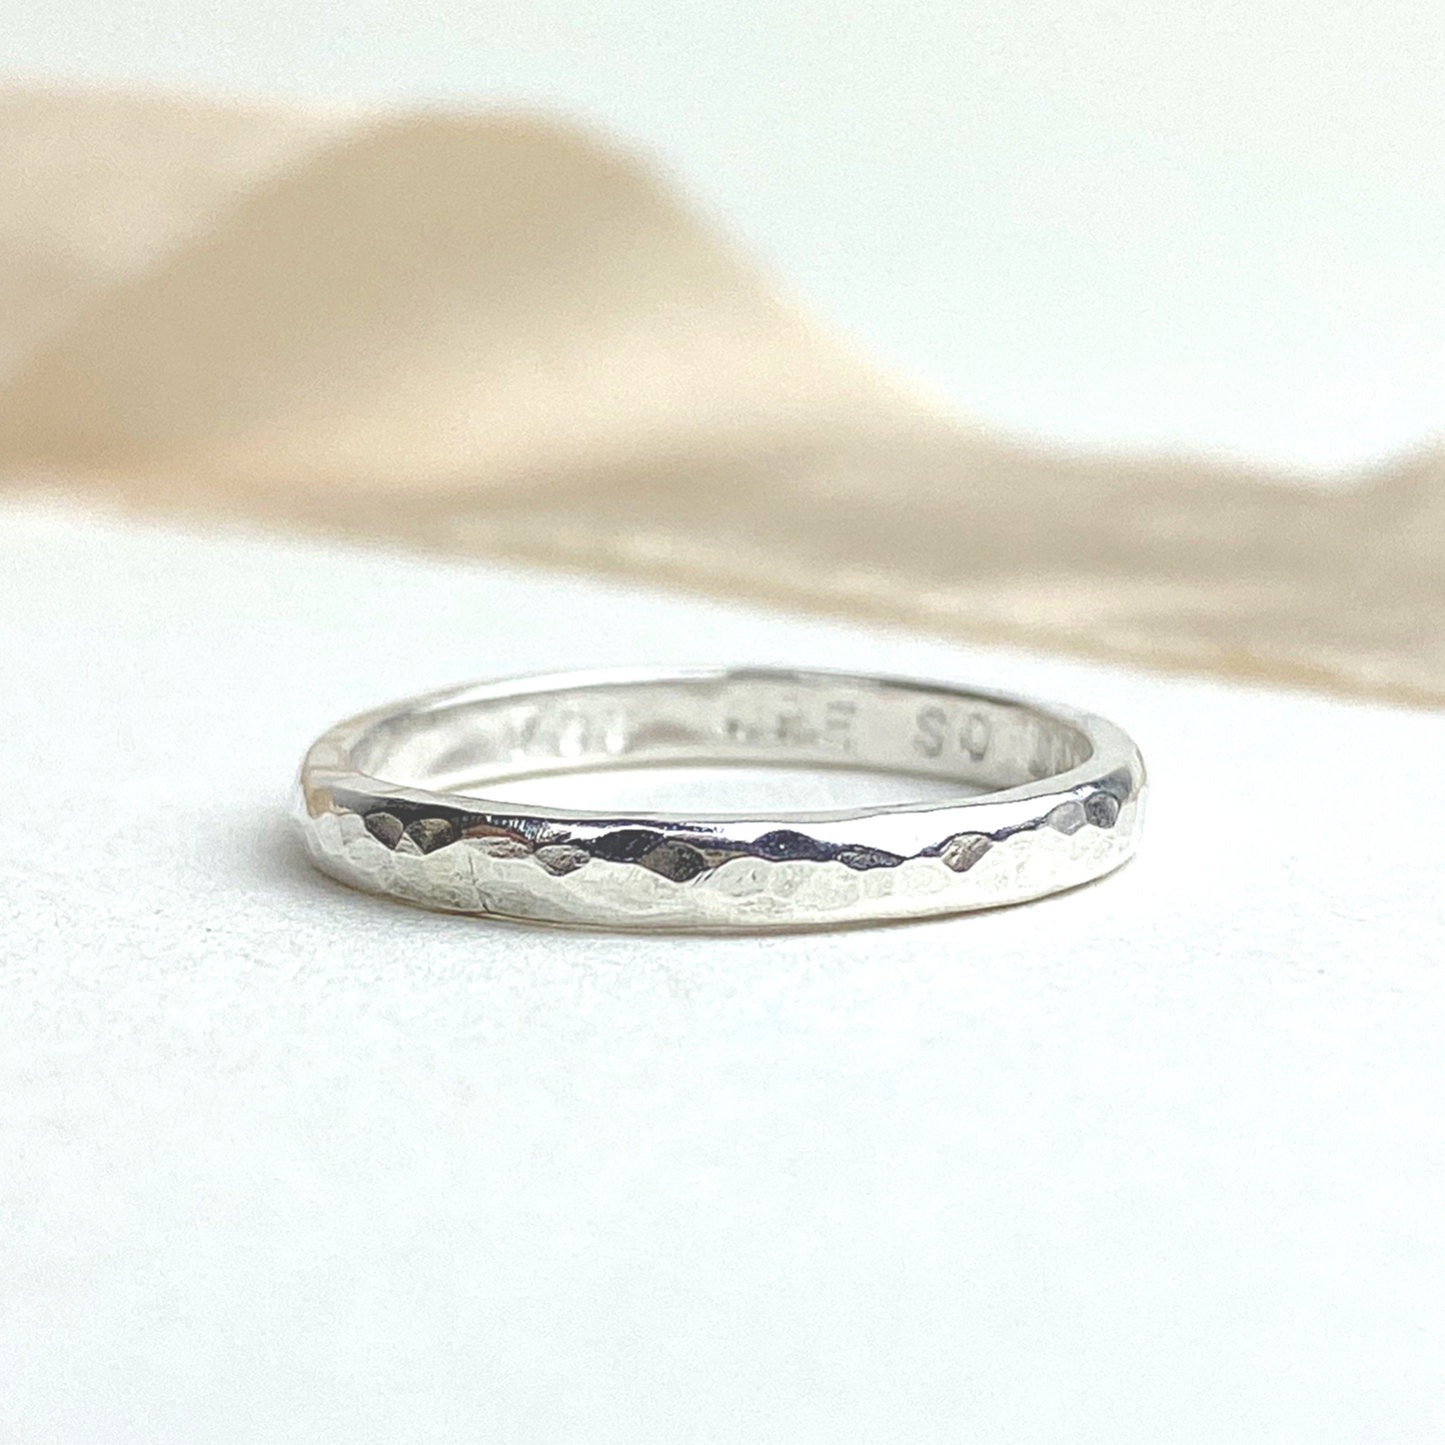 The Mite Personalised Stacking Ring - sterling silver personalised textured skinny stacking ring - hand stamped monogram and name jewellery